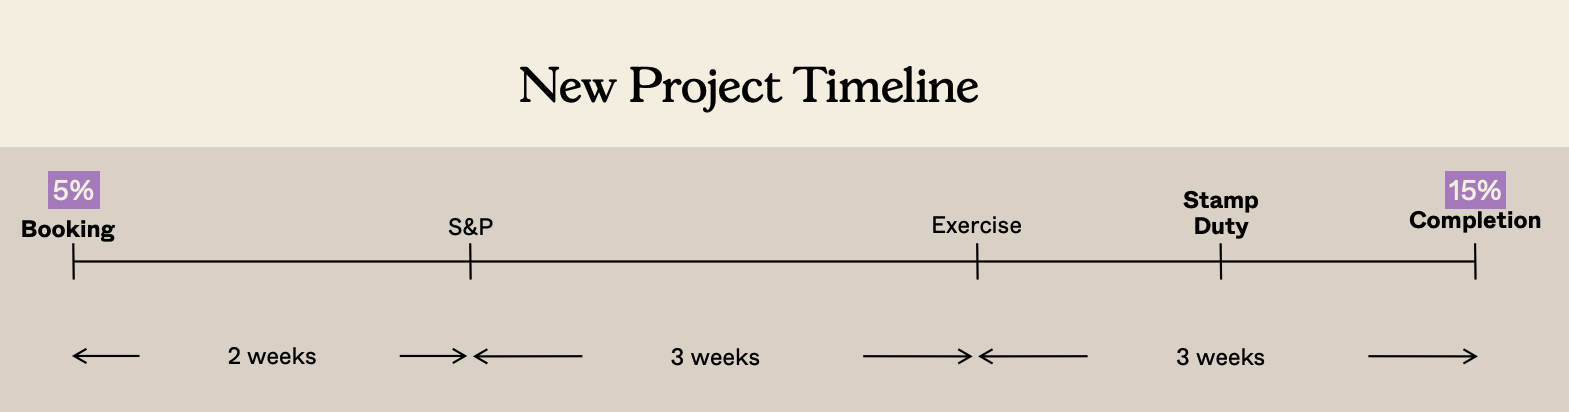 new launch timeline